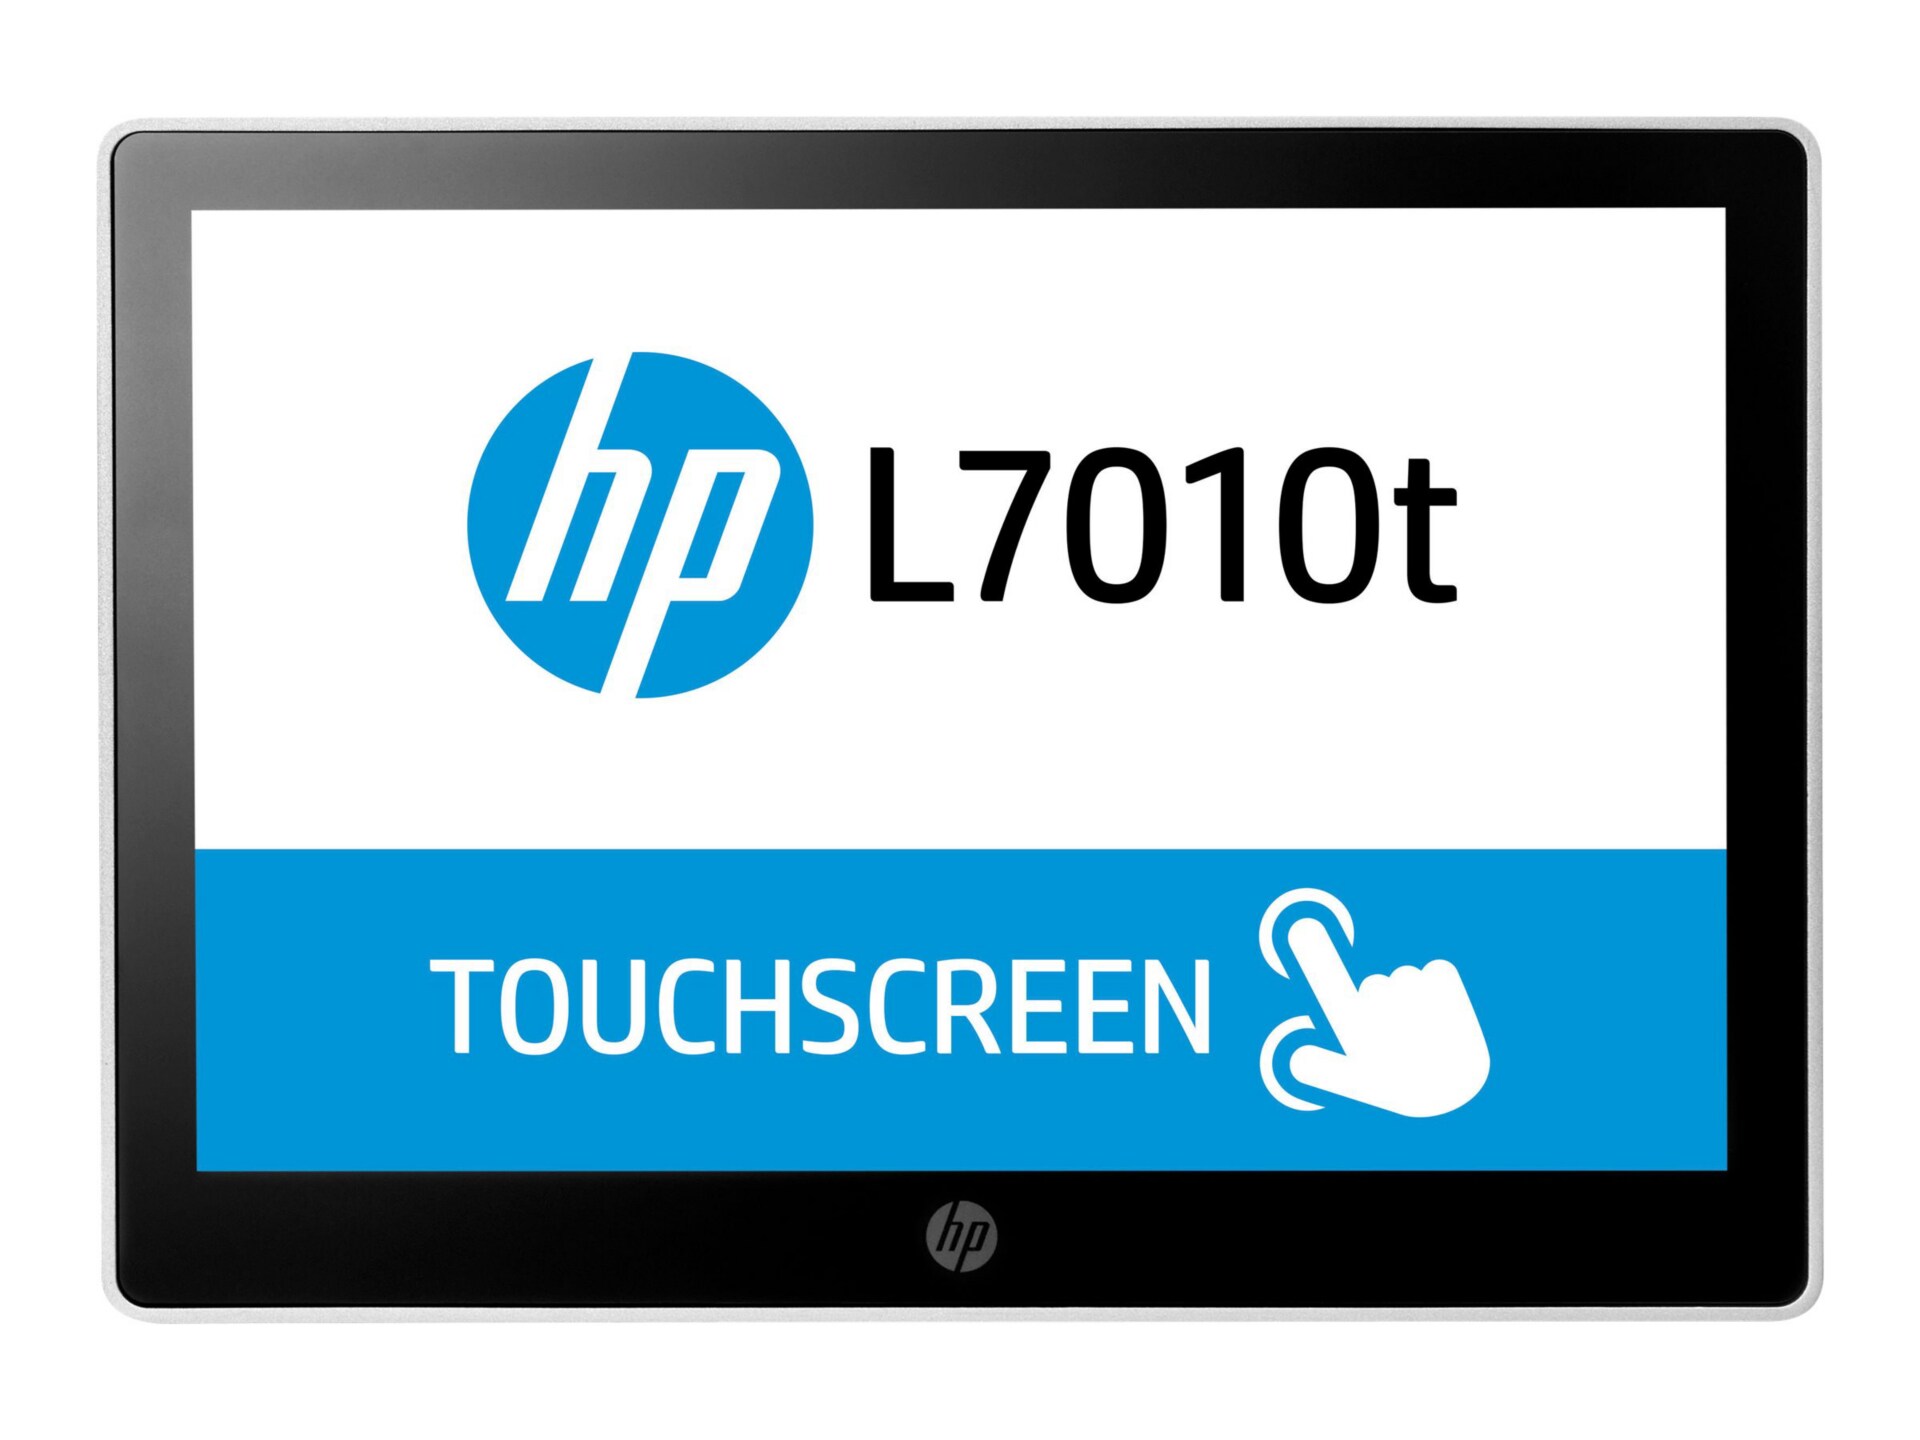 HP L7010t Retail Touch Monitor - LED monitor - 10.1" - Smart Buy